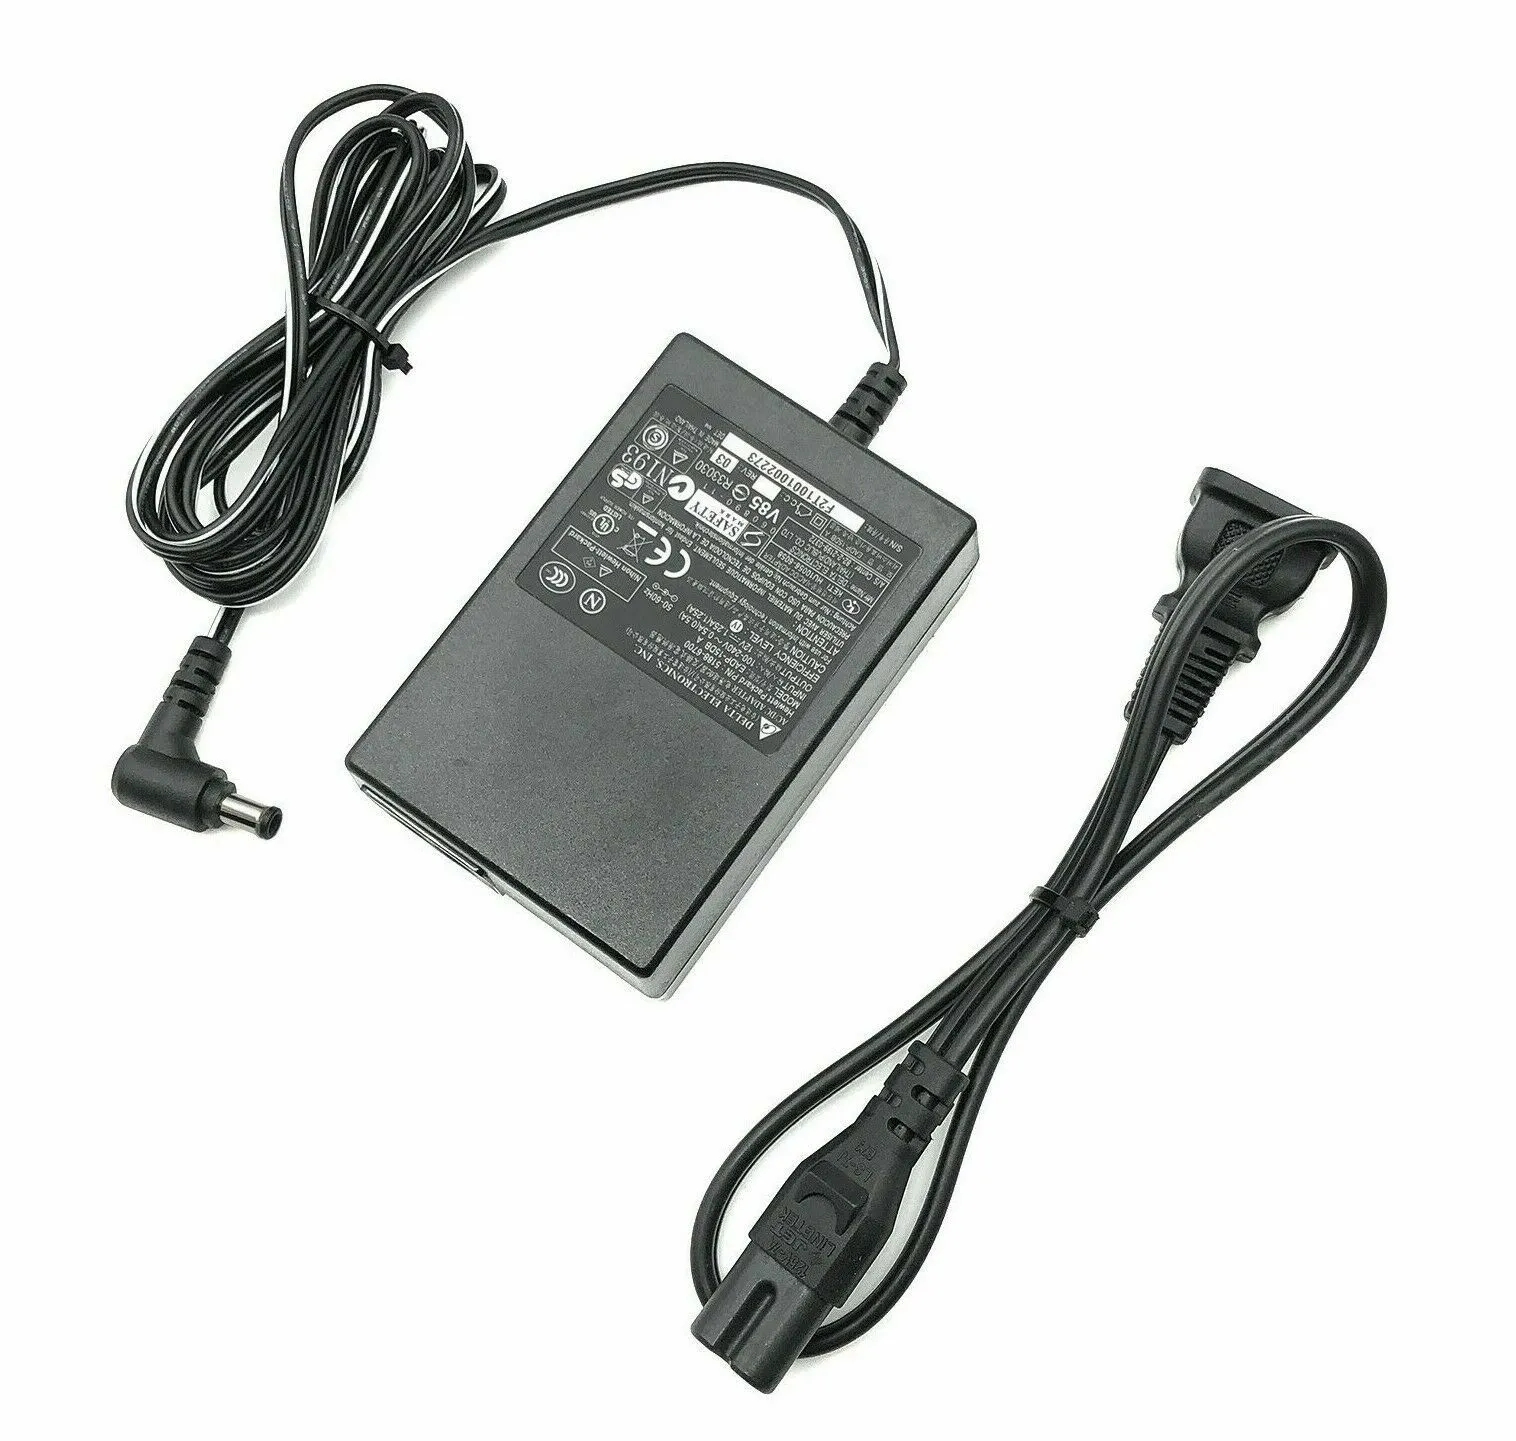 *Brand NEW*Genuine Delta EADP-15DB 12V 1.25A AC Adapter 5188-6700 Power Supply - Click Image to Close